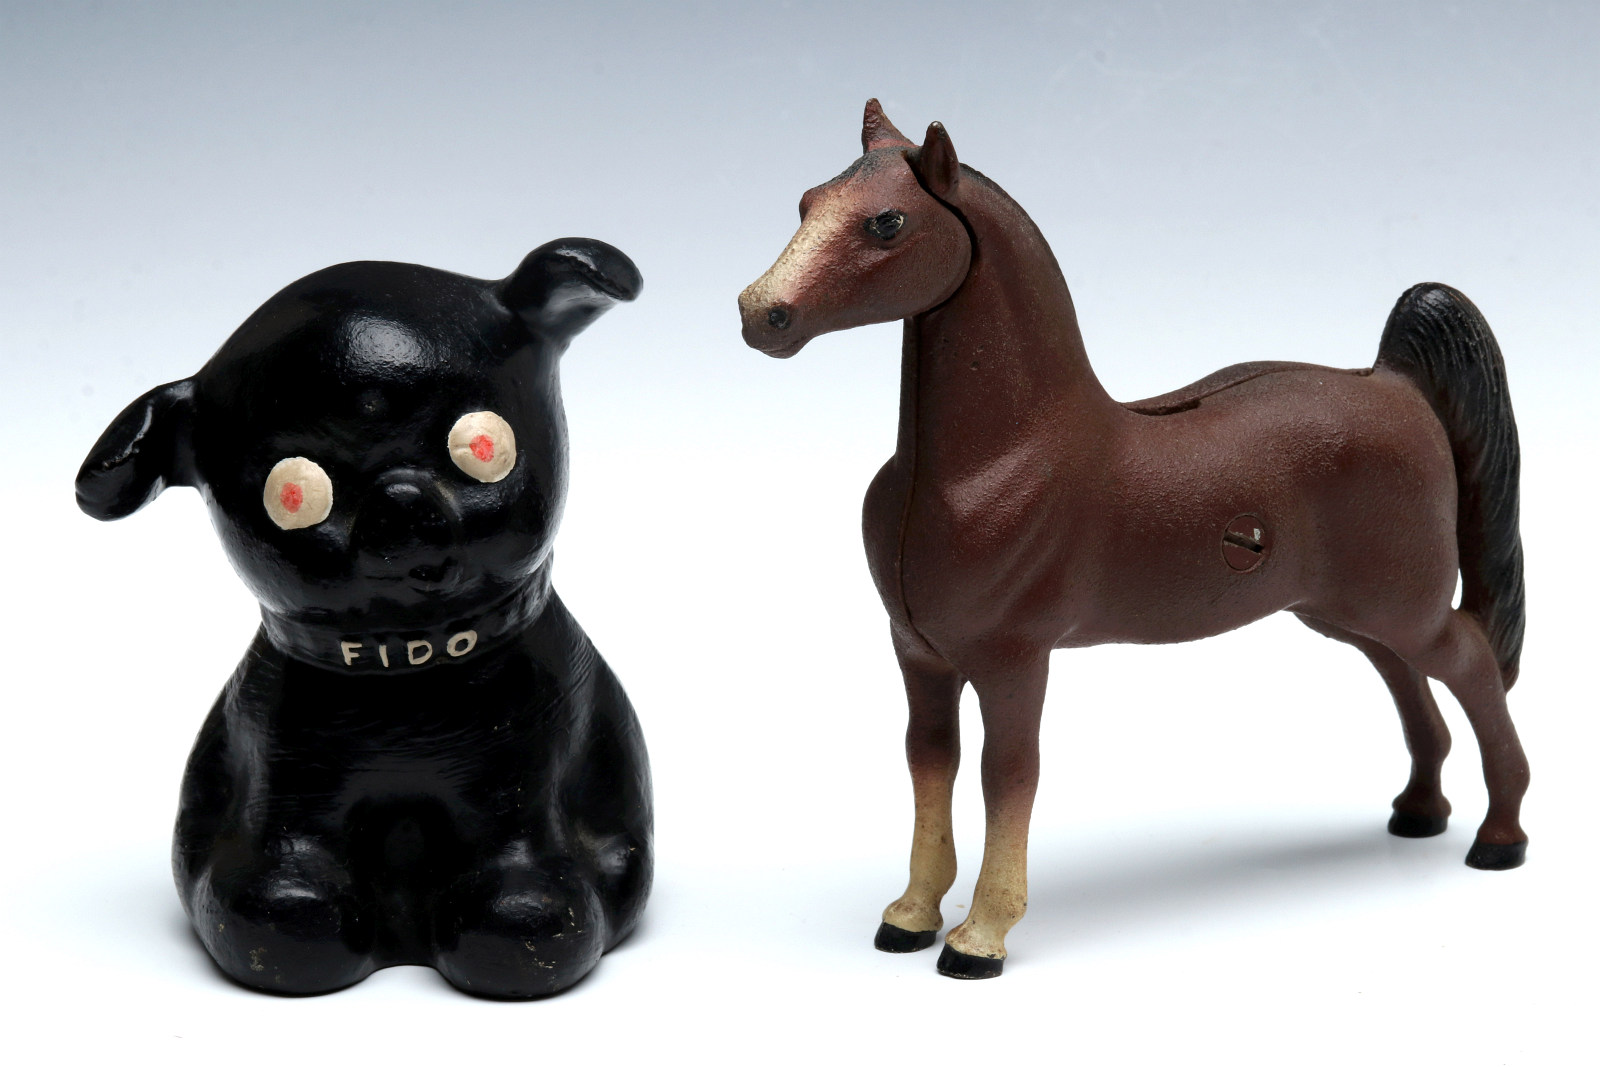 A SMALL HUBLEY SHOW HORSE AND 'FIDO' PAPERWEIGHT